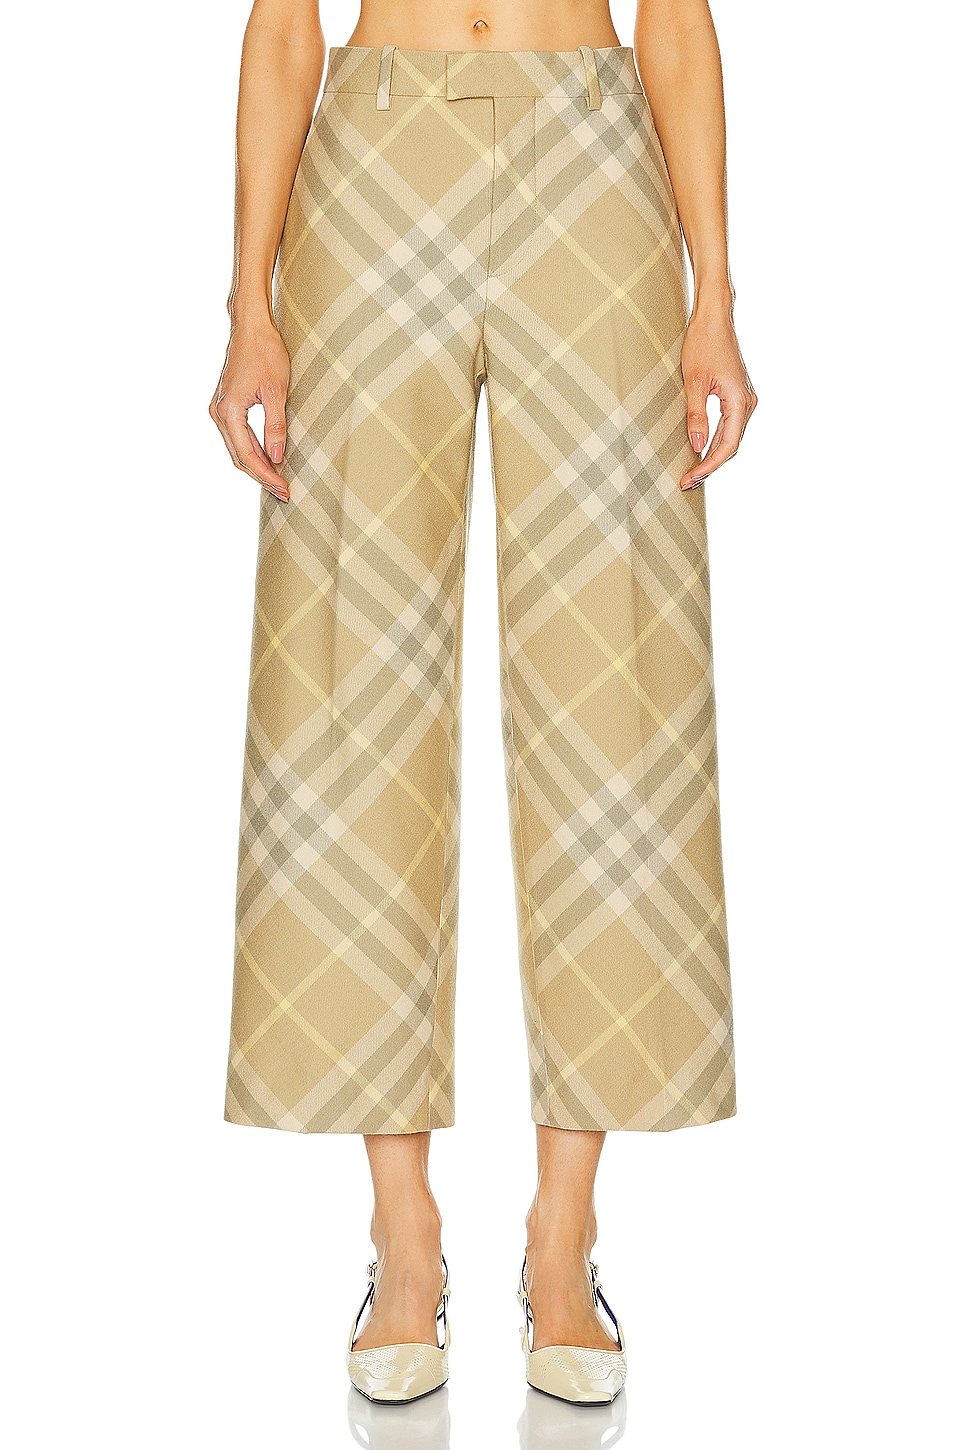 Image 1 of Burberry Tailored Trouser in Flax Check